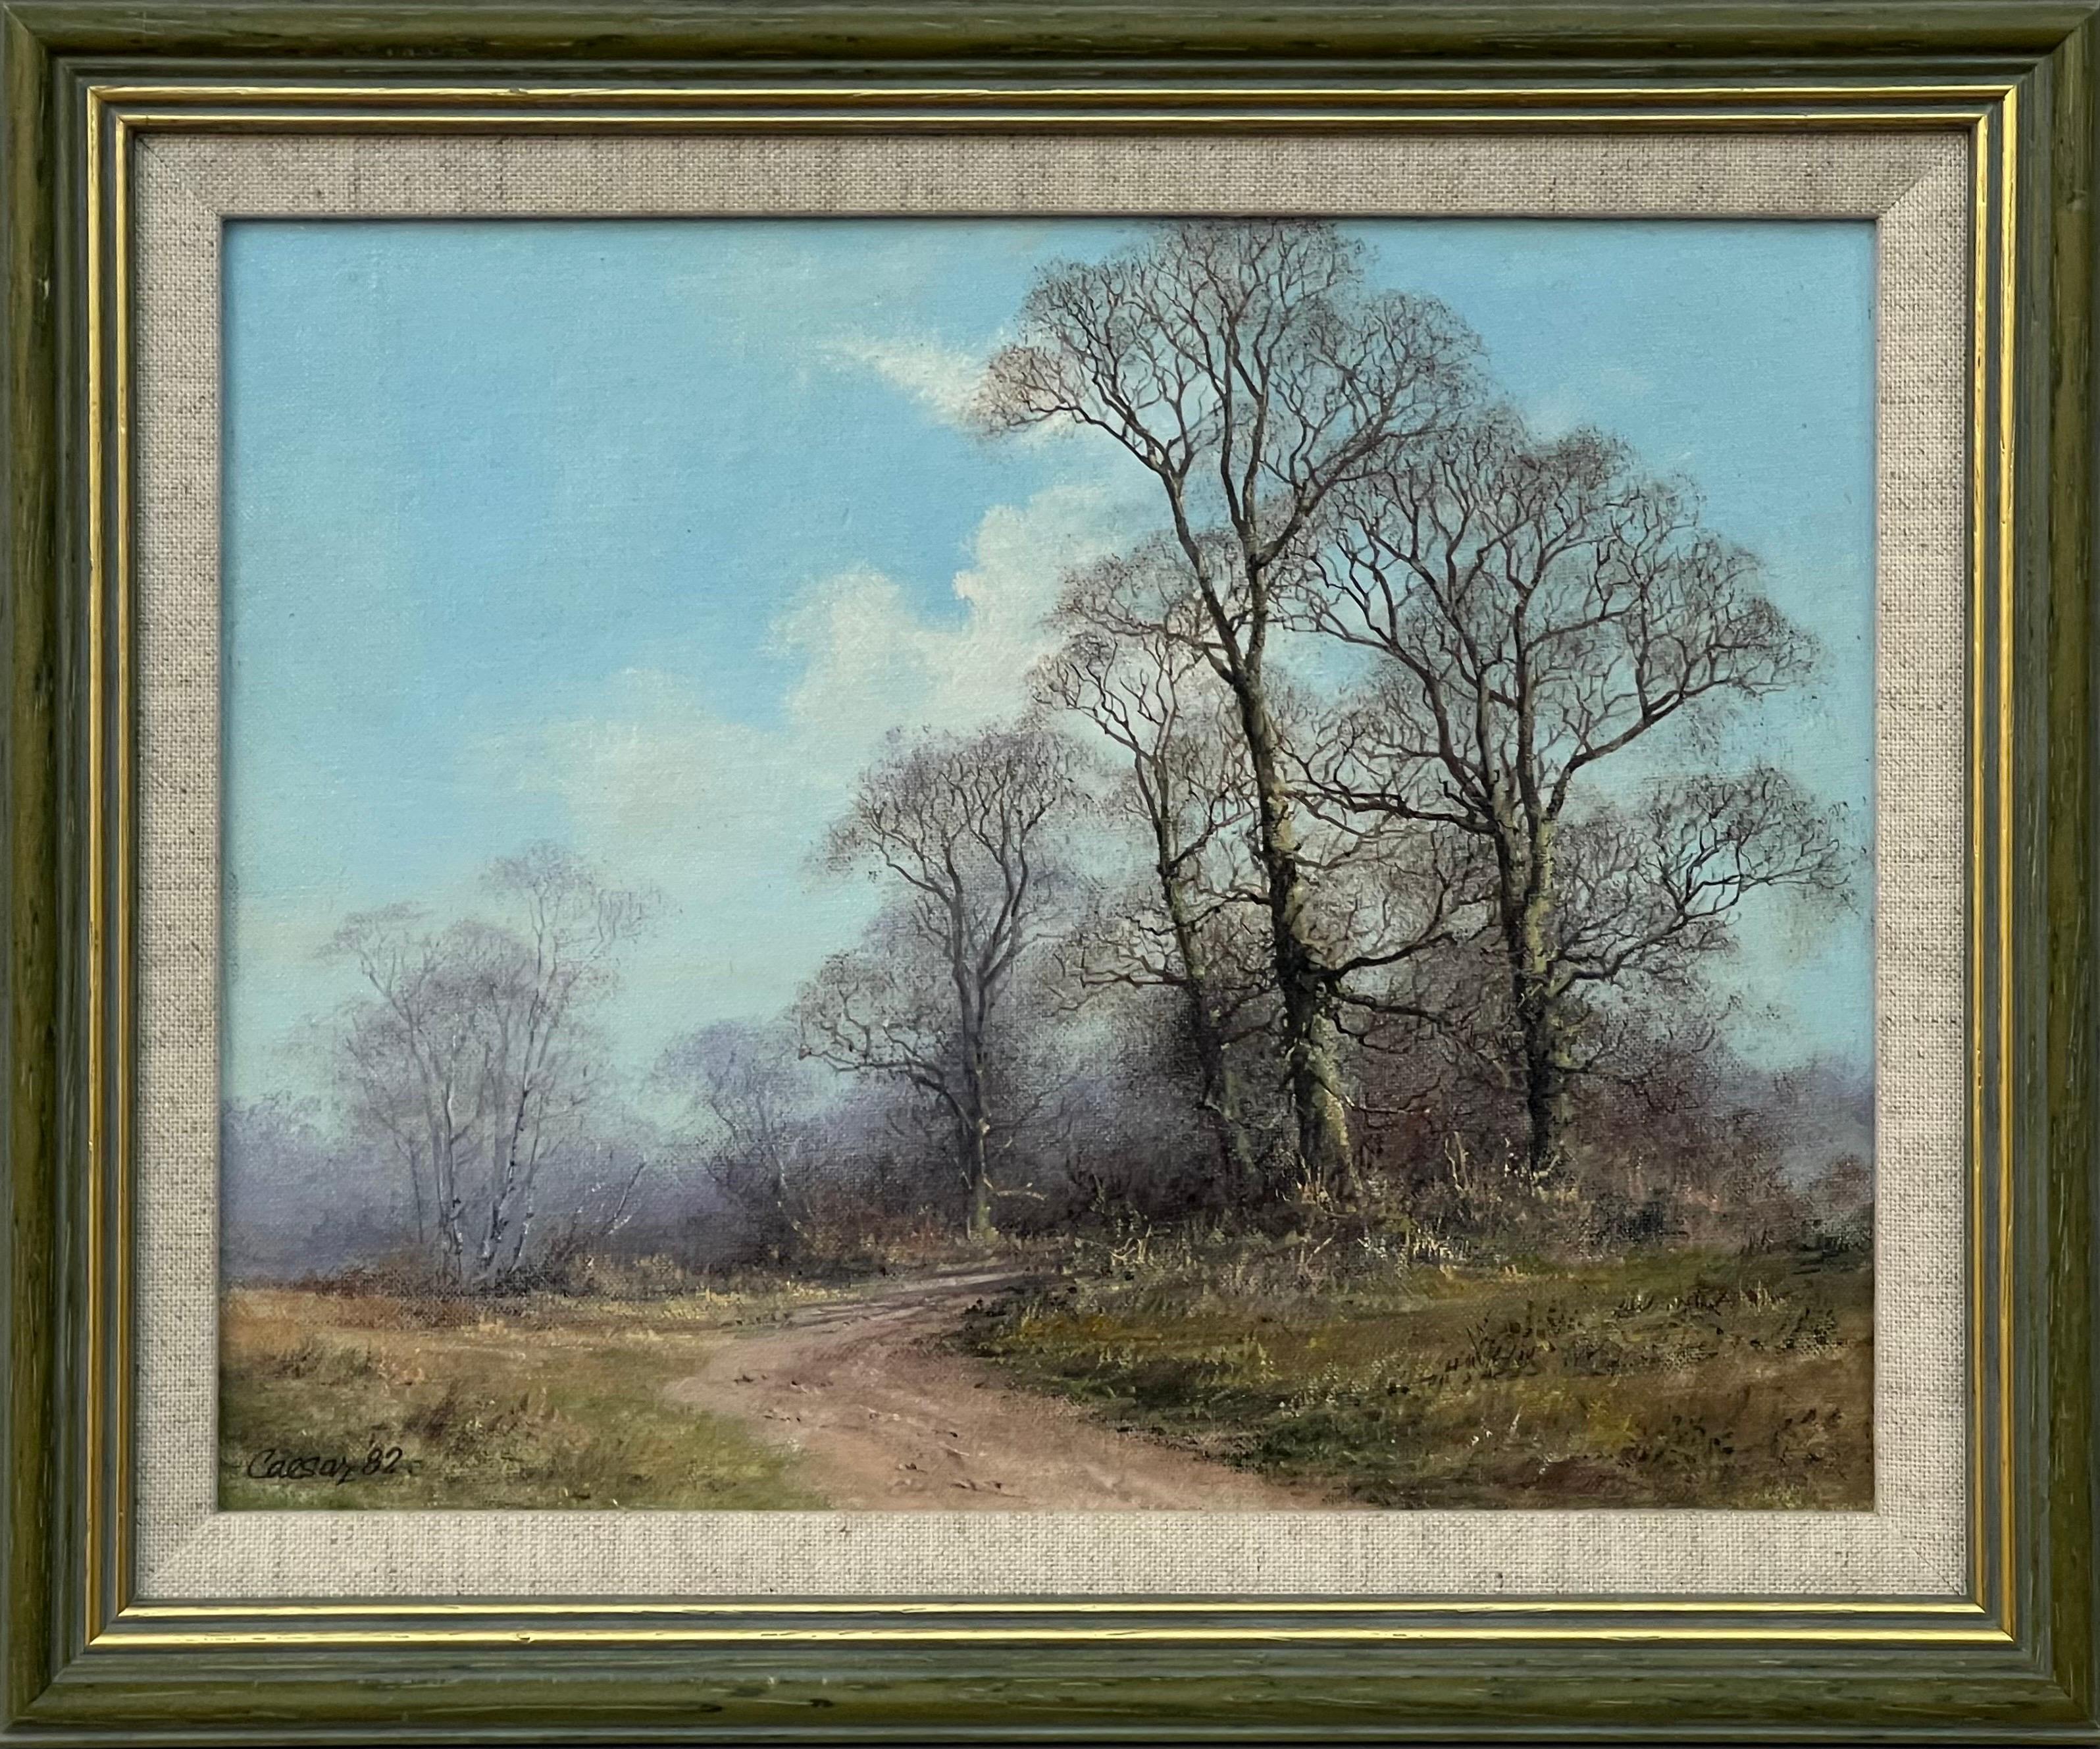 John Caesar Smith Landscape Painting - Oil Painting of Natural English Woodland Scene by 20th Century British Artist